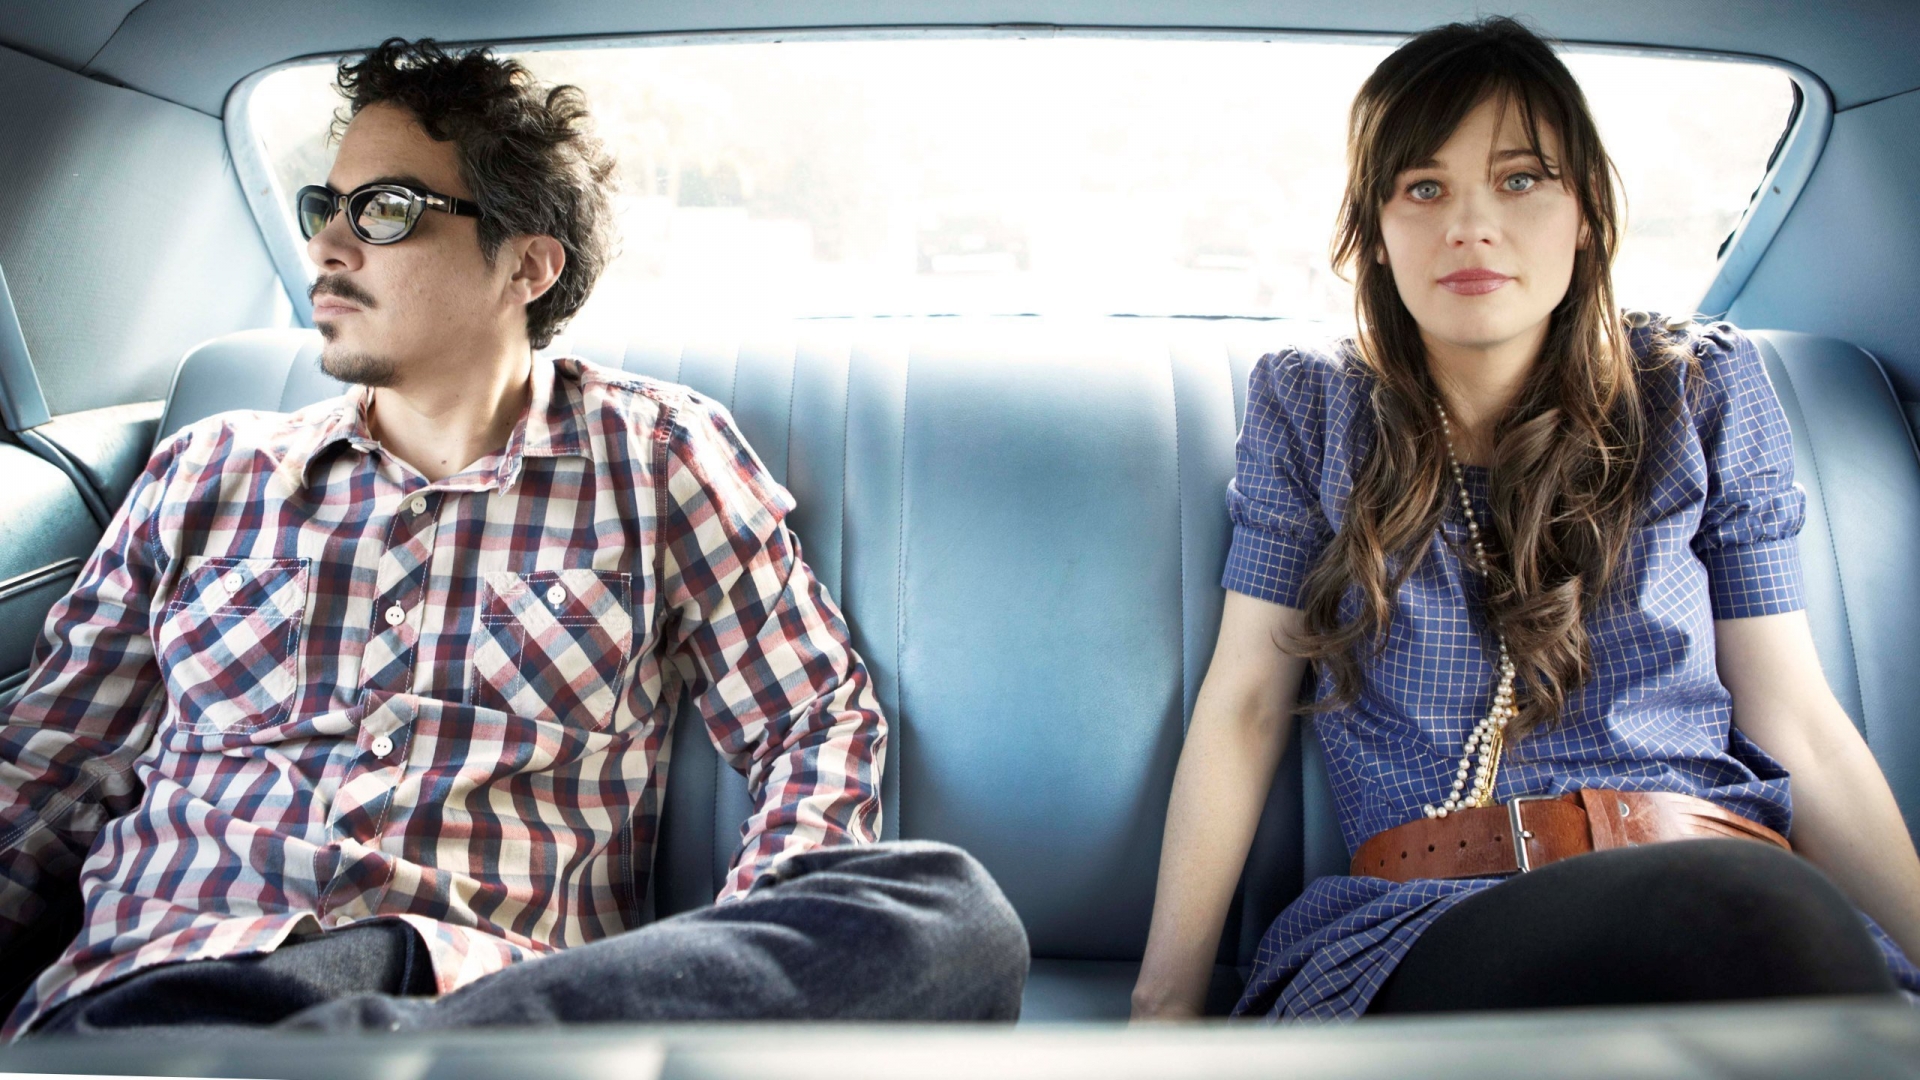 She and Him Band for 1920 x 1080 HDTV 1080p resolution